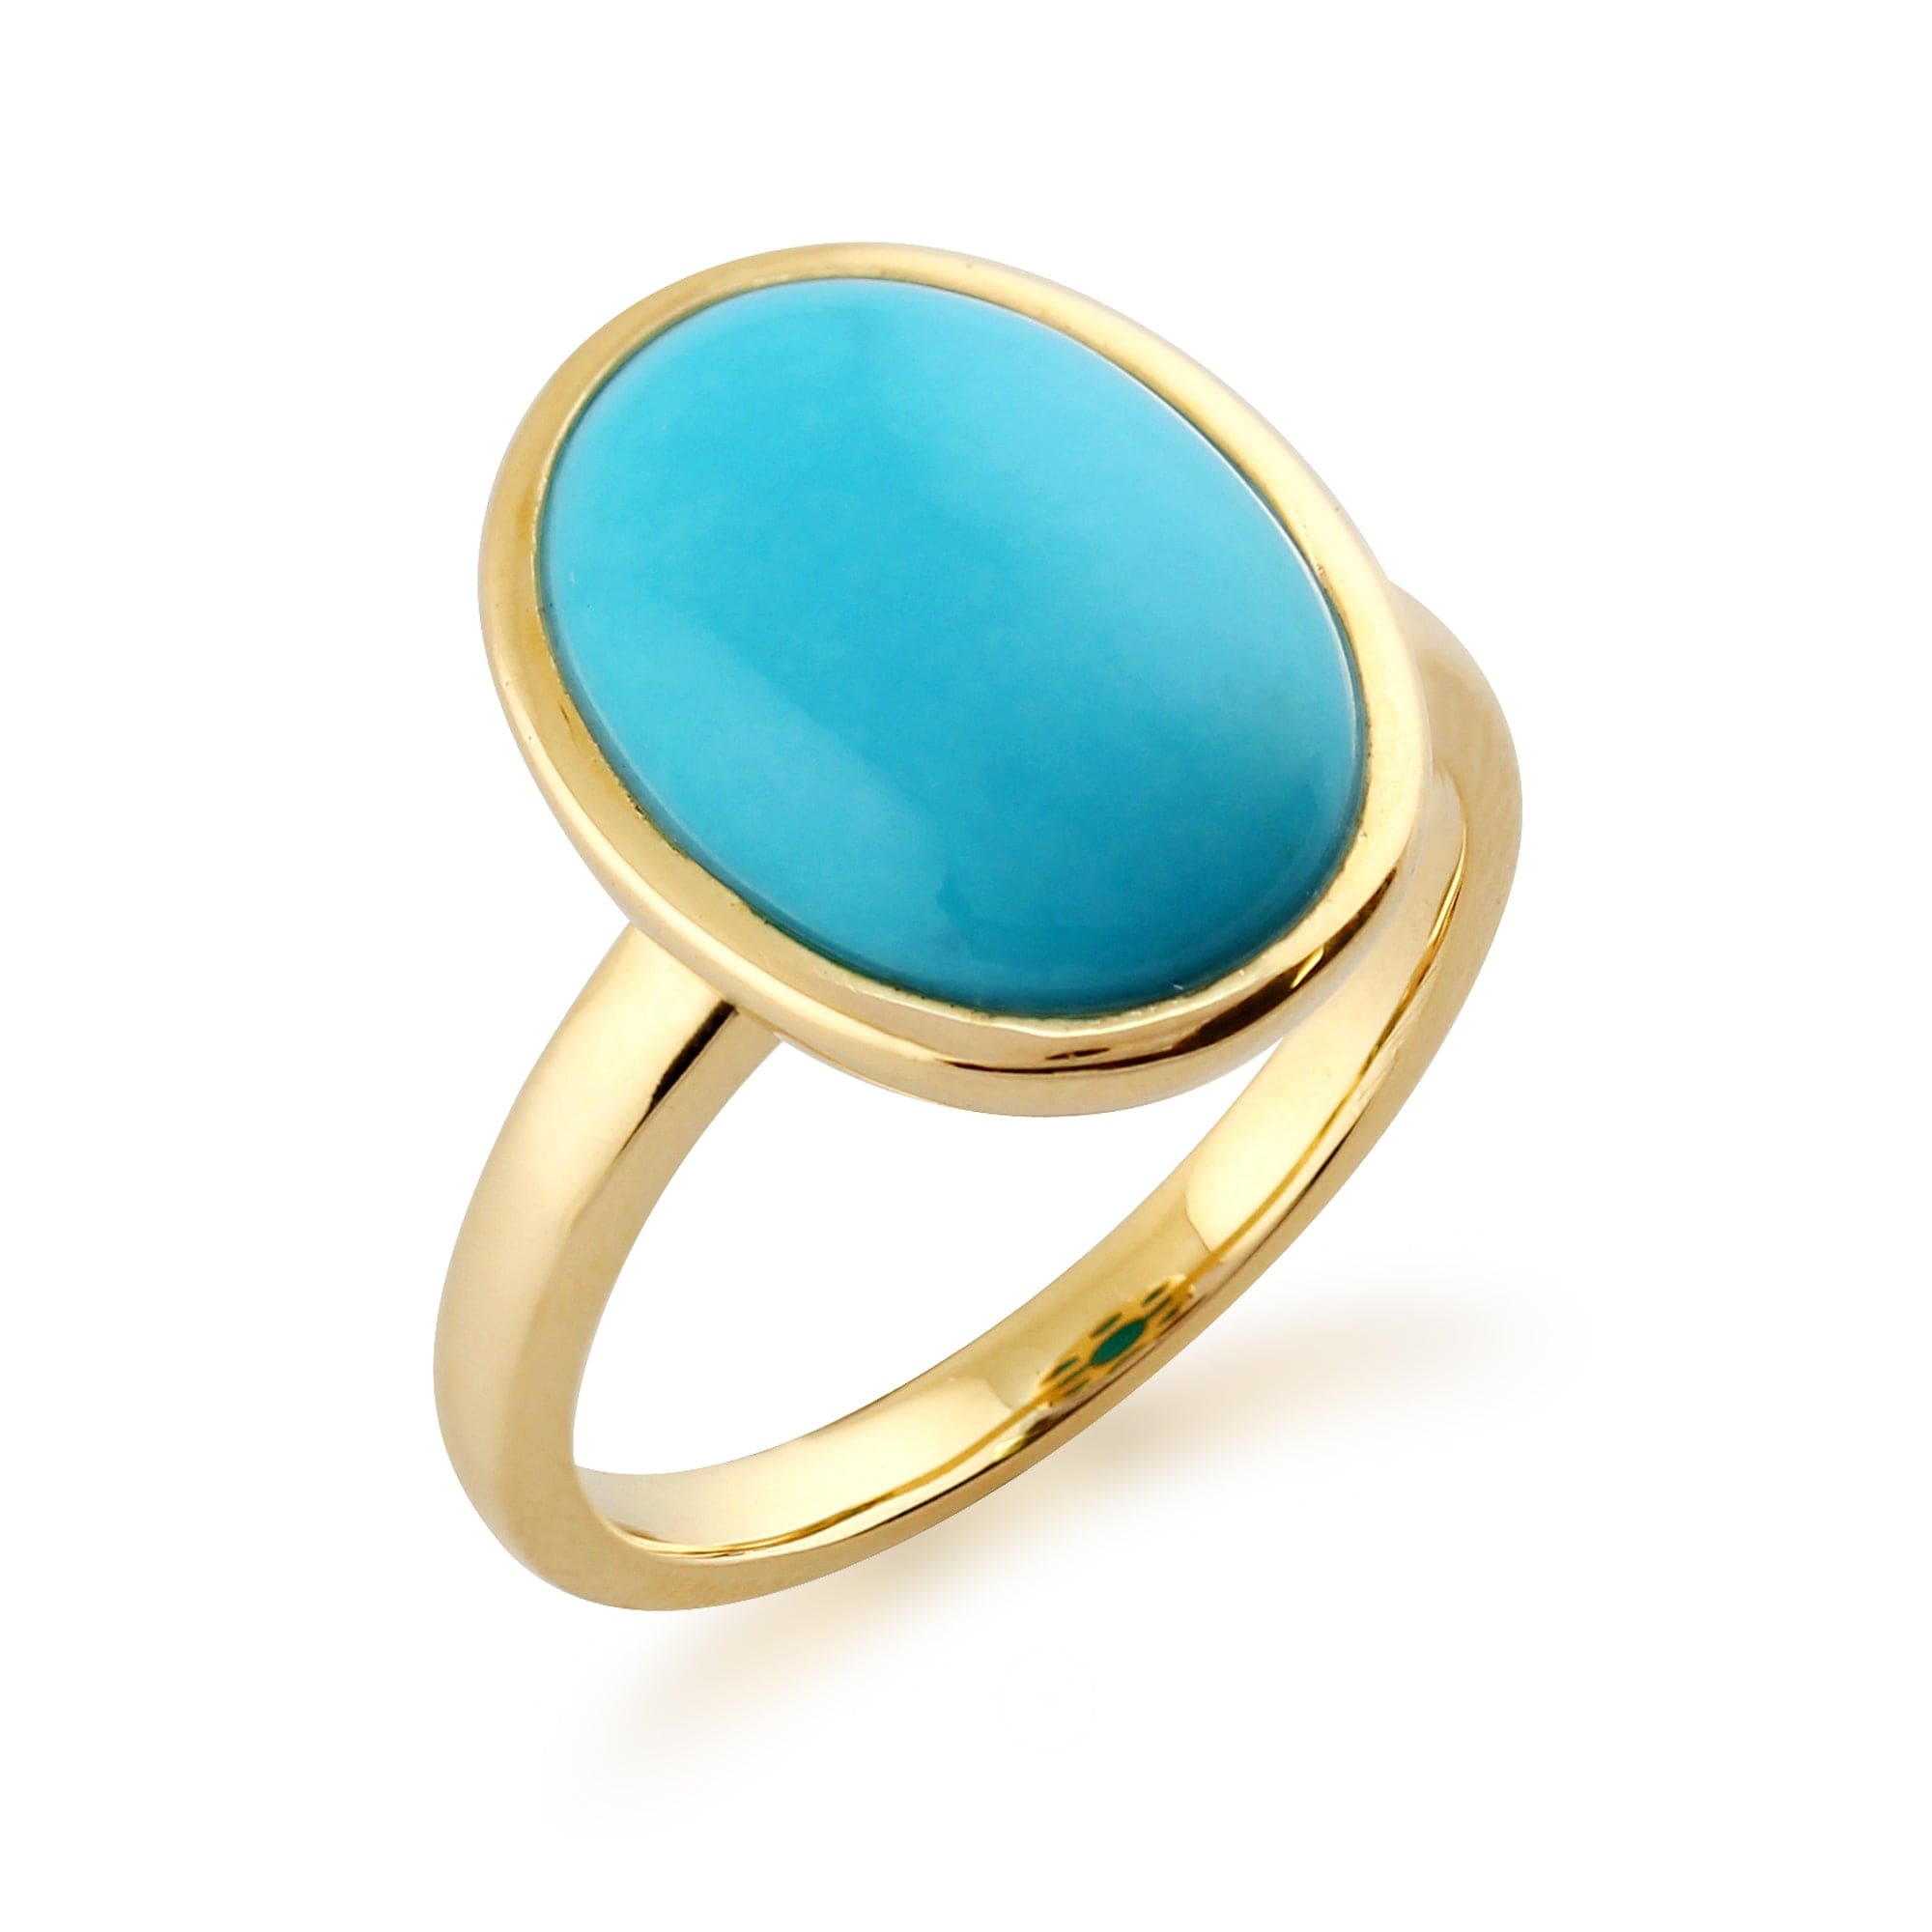 Statement Oval Turquoise Ring in 9ct Yellow Gold - Gemondo